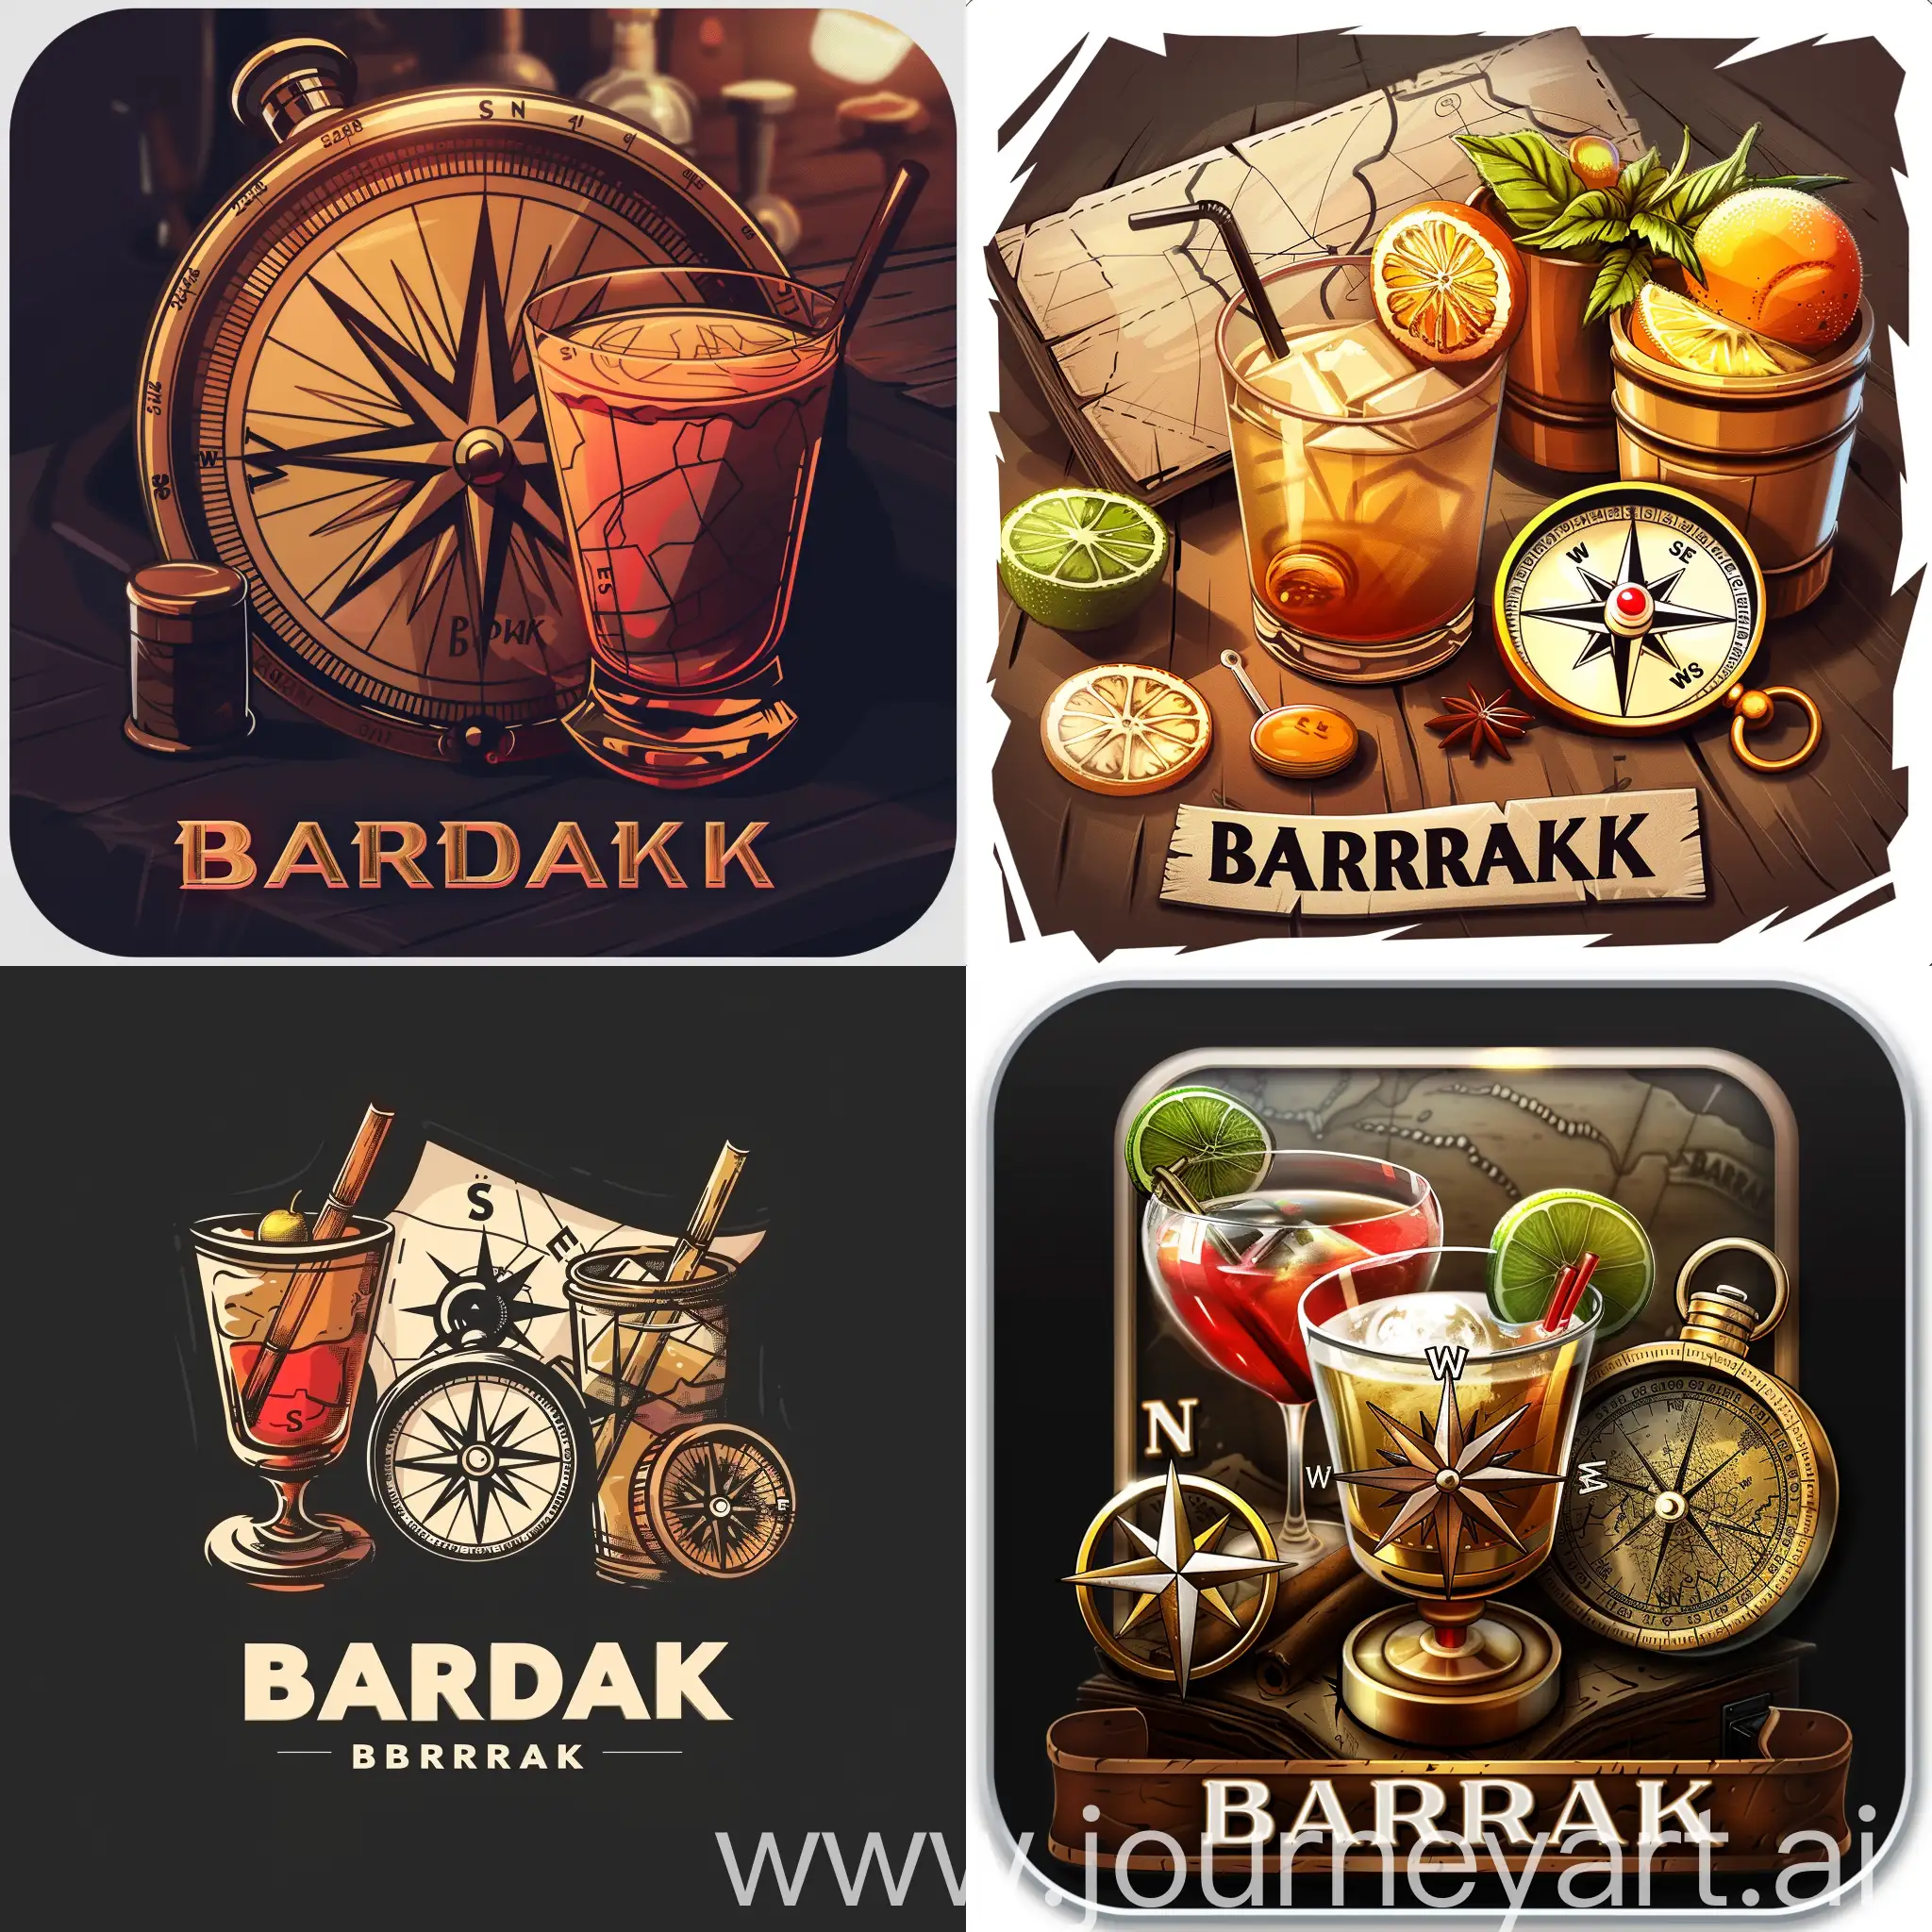 logo for the app. It should depict a compass, a map, a cocktail. The image should be in loft style and not be overloaded. the image should have the name of the application ''BARDAK''.